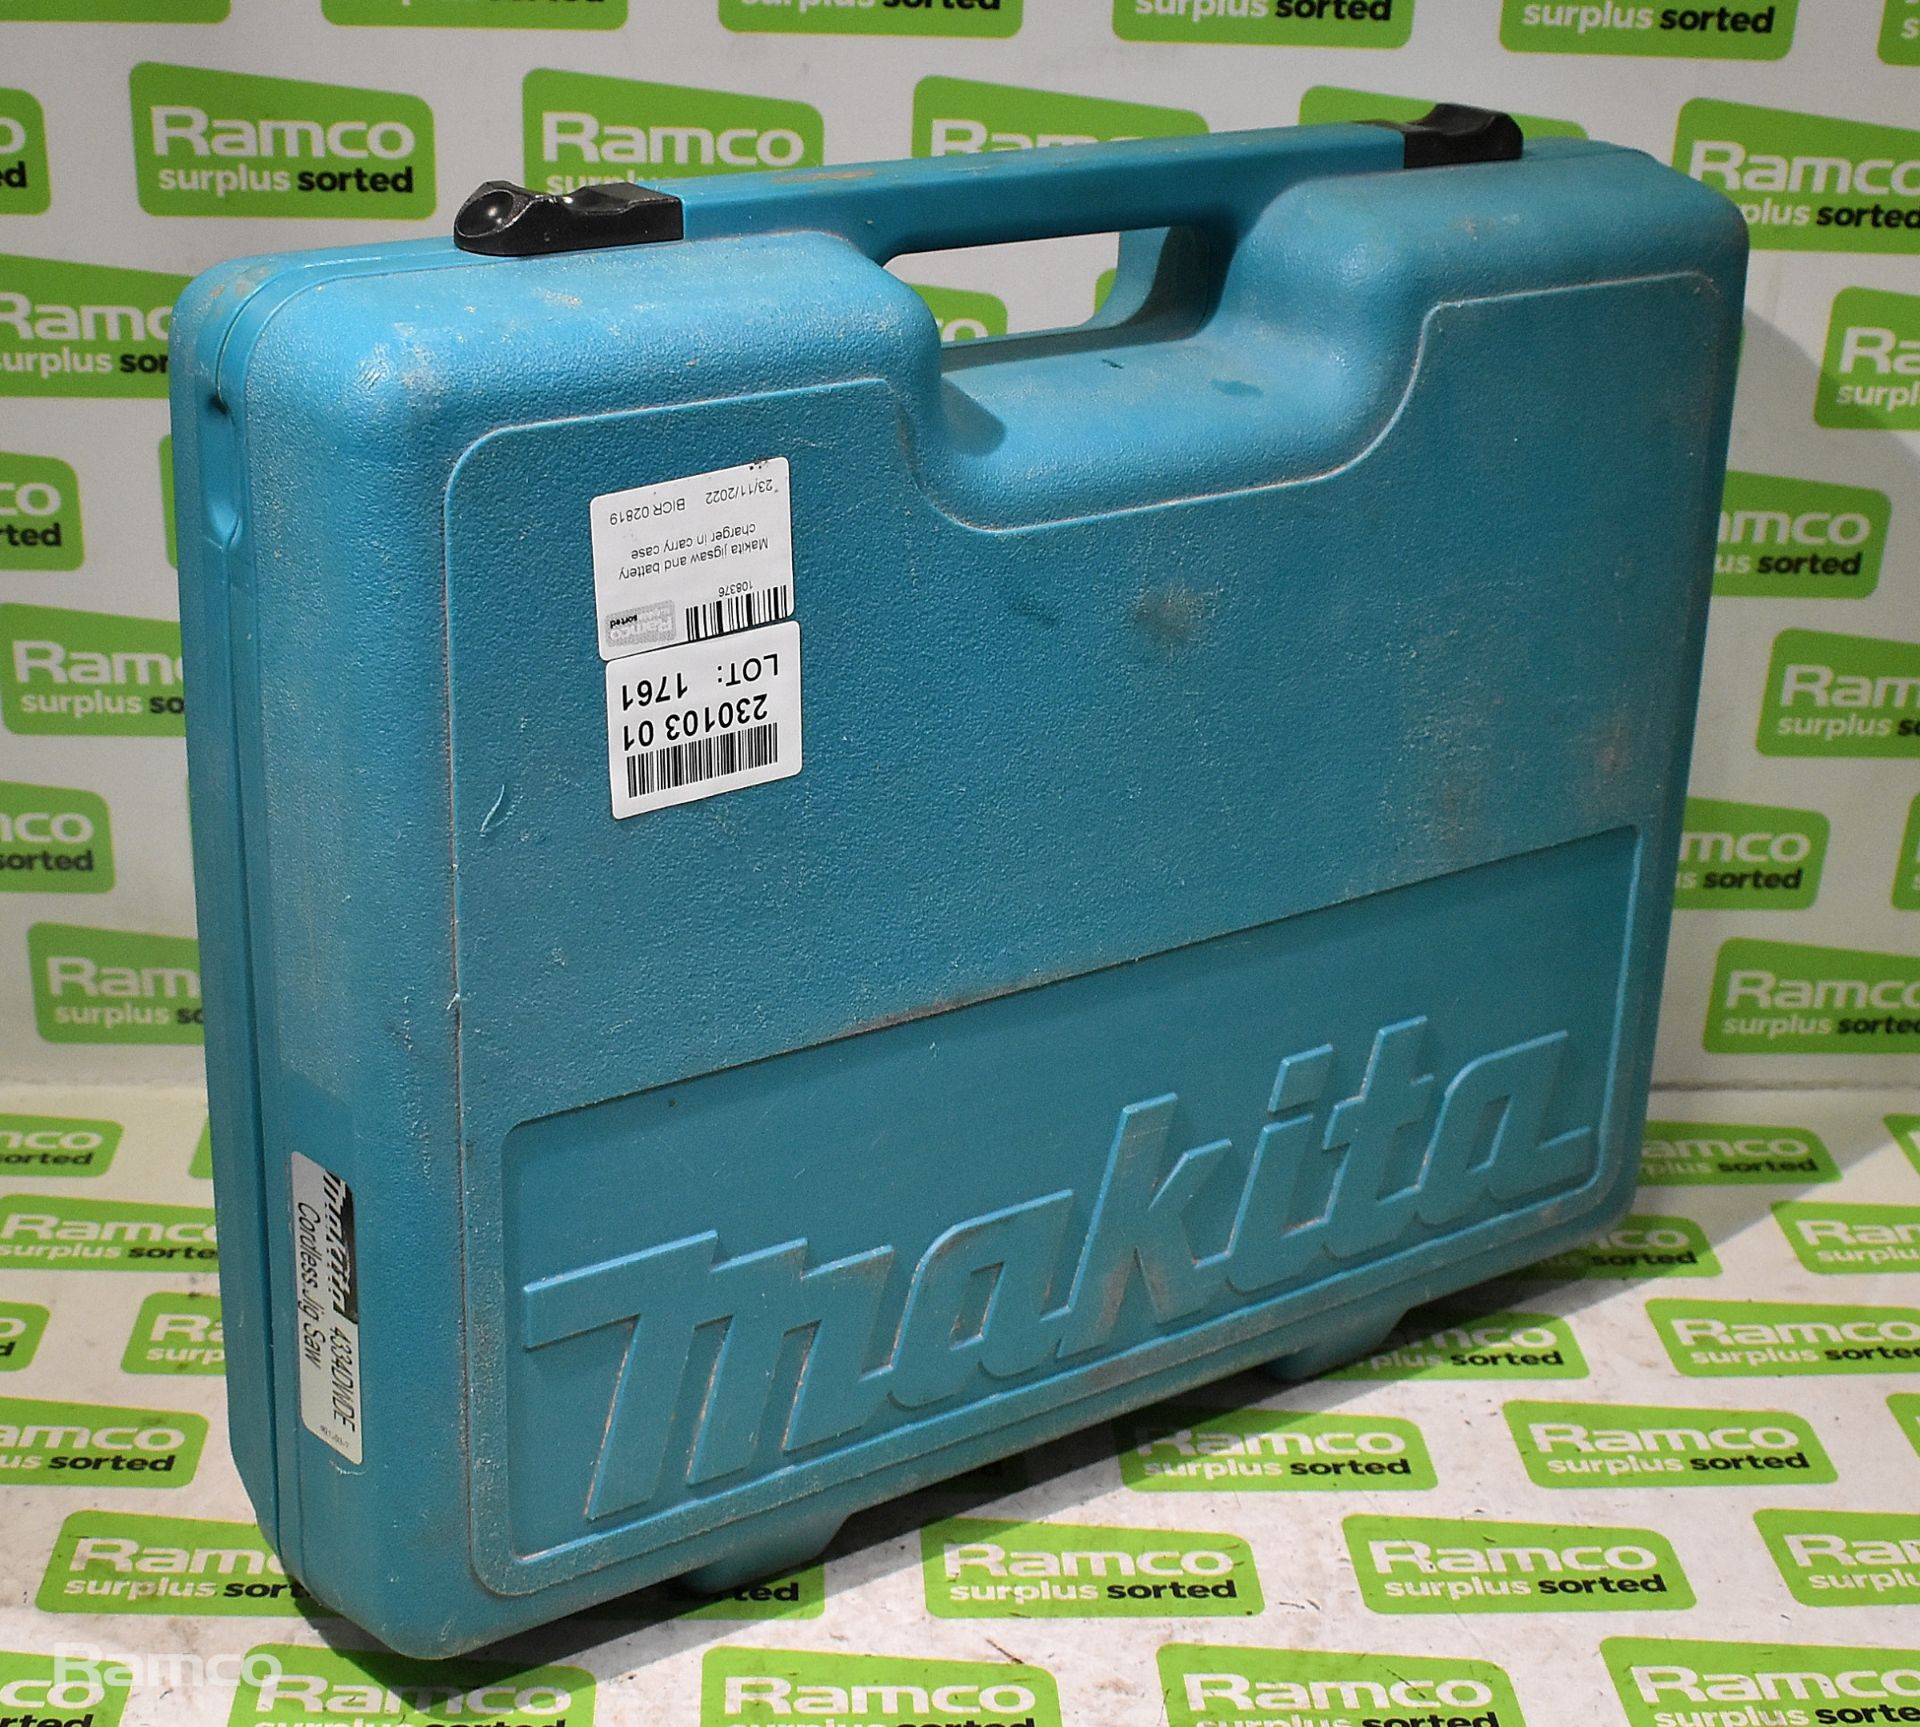 Makita jigsaw and battery charger in carry case - Image 5 of 5